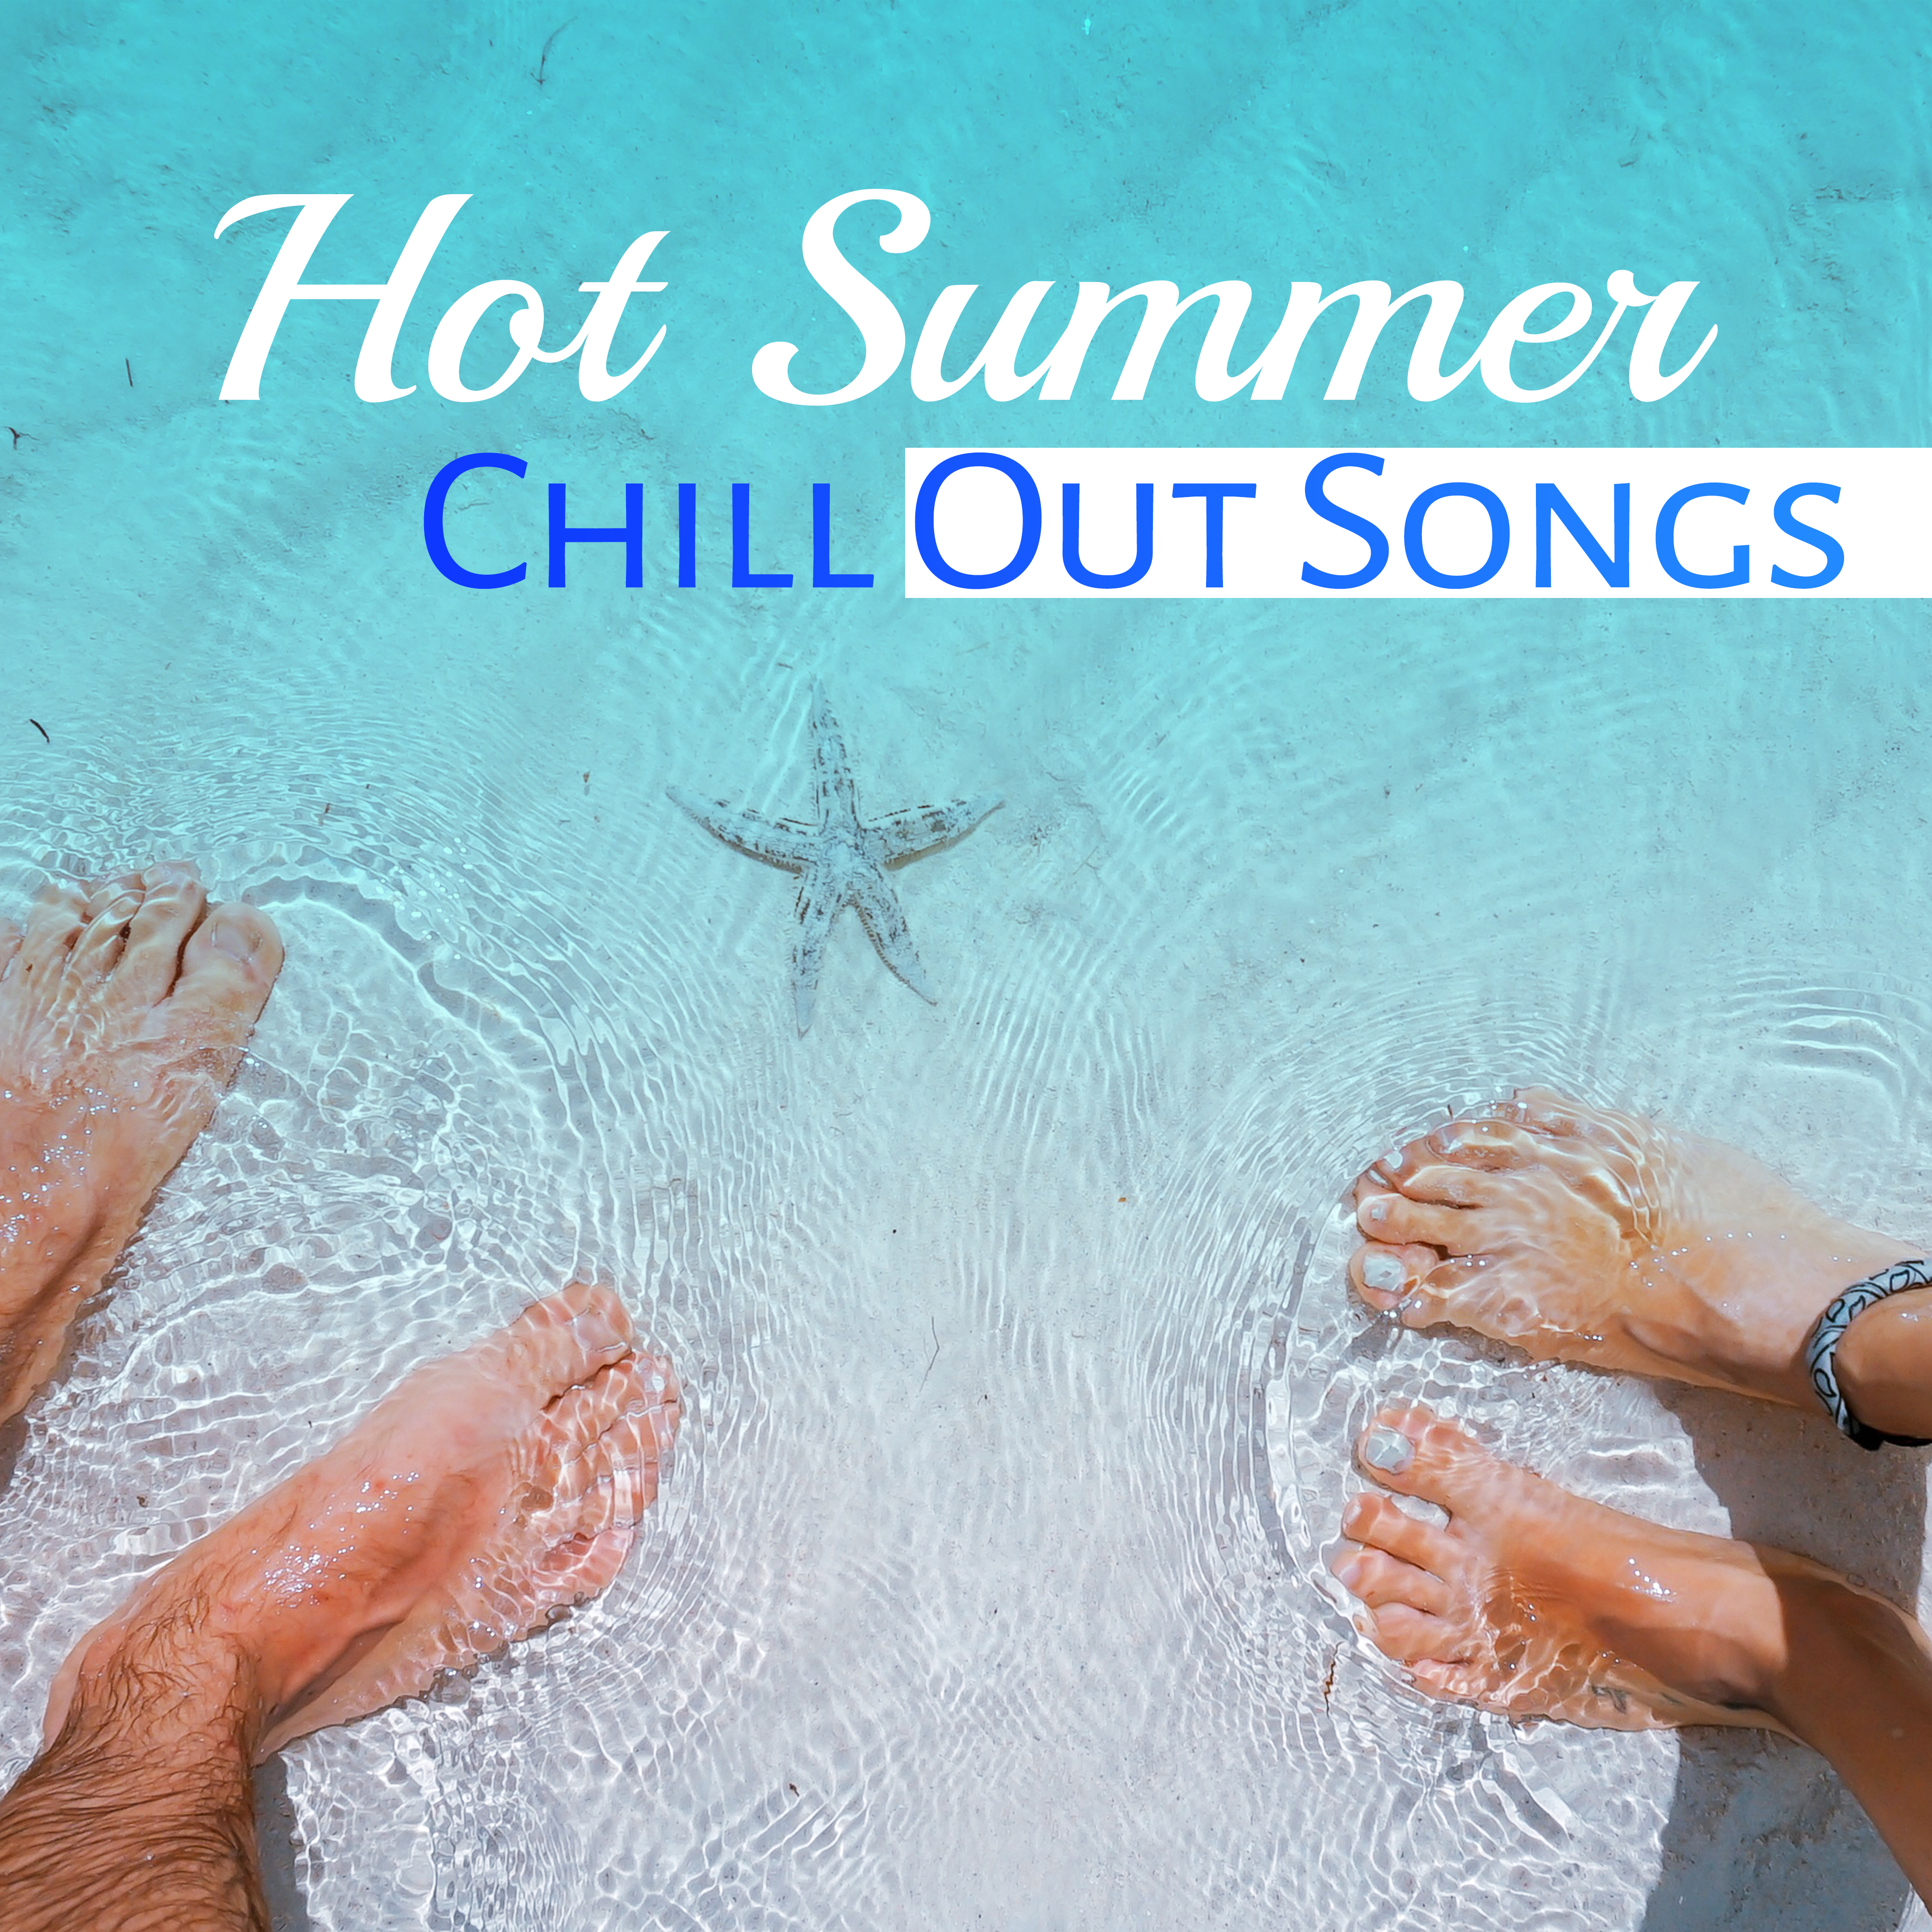 Hot Summer Chill Out Songs – Rest on the Beach, Chill Out Vibes, Electronic Beats, Sweet Holidays